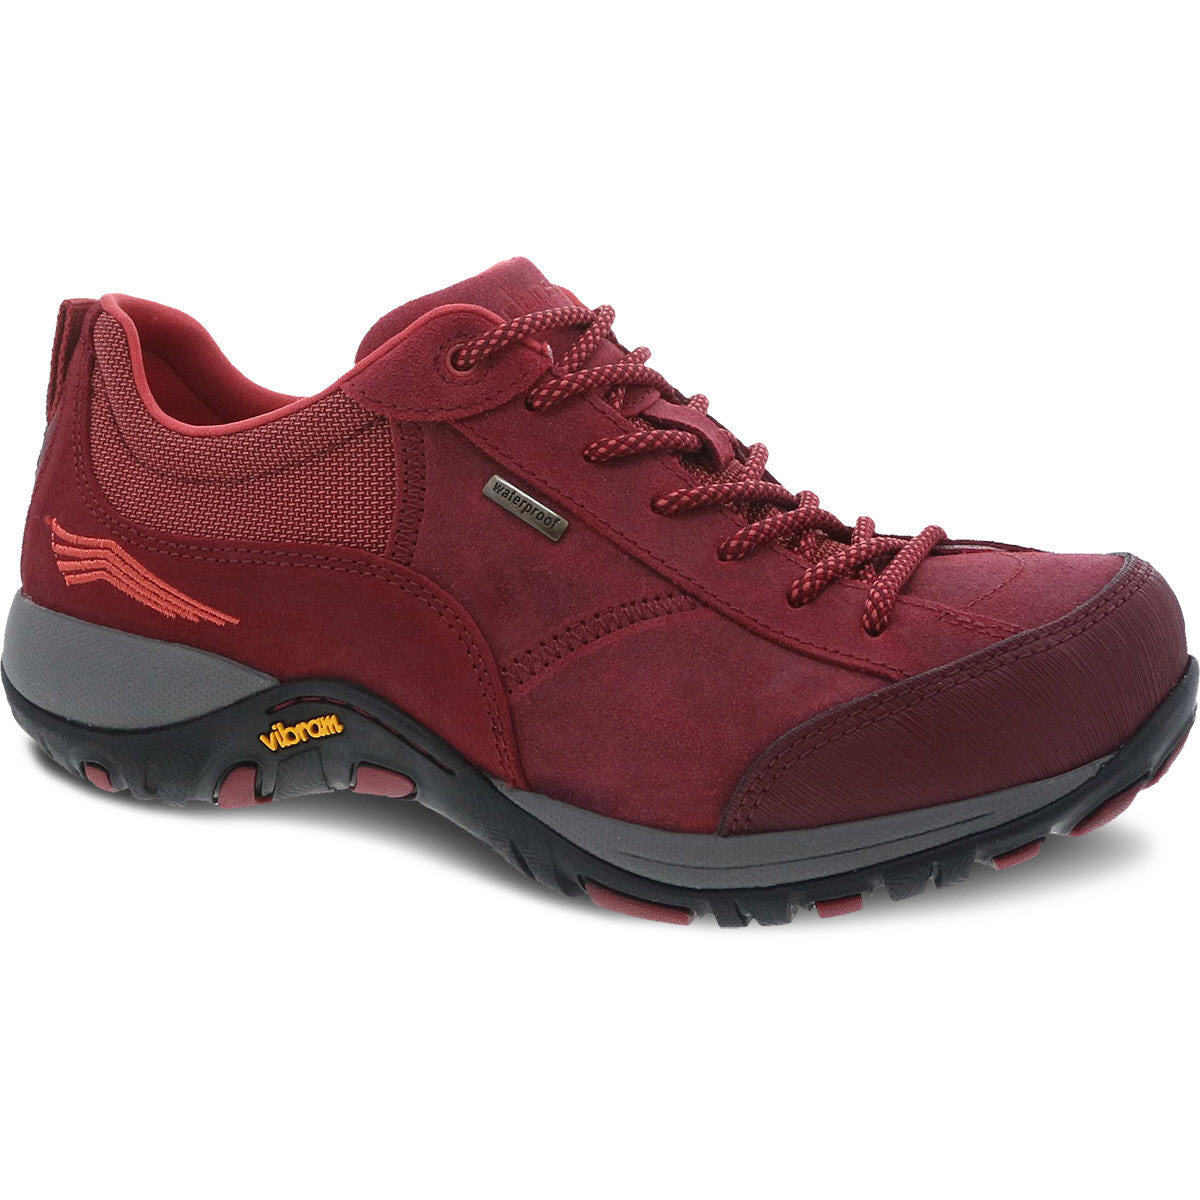 Dansko red outdoor walking shoe with a waterproof membrane and Vibram rubber outsole.